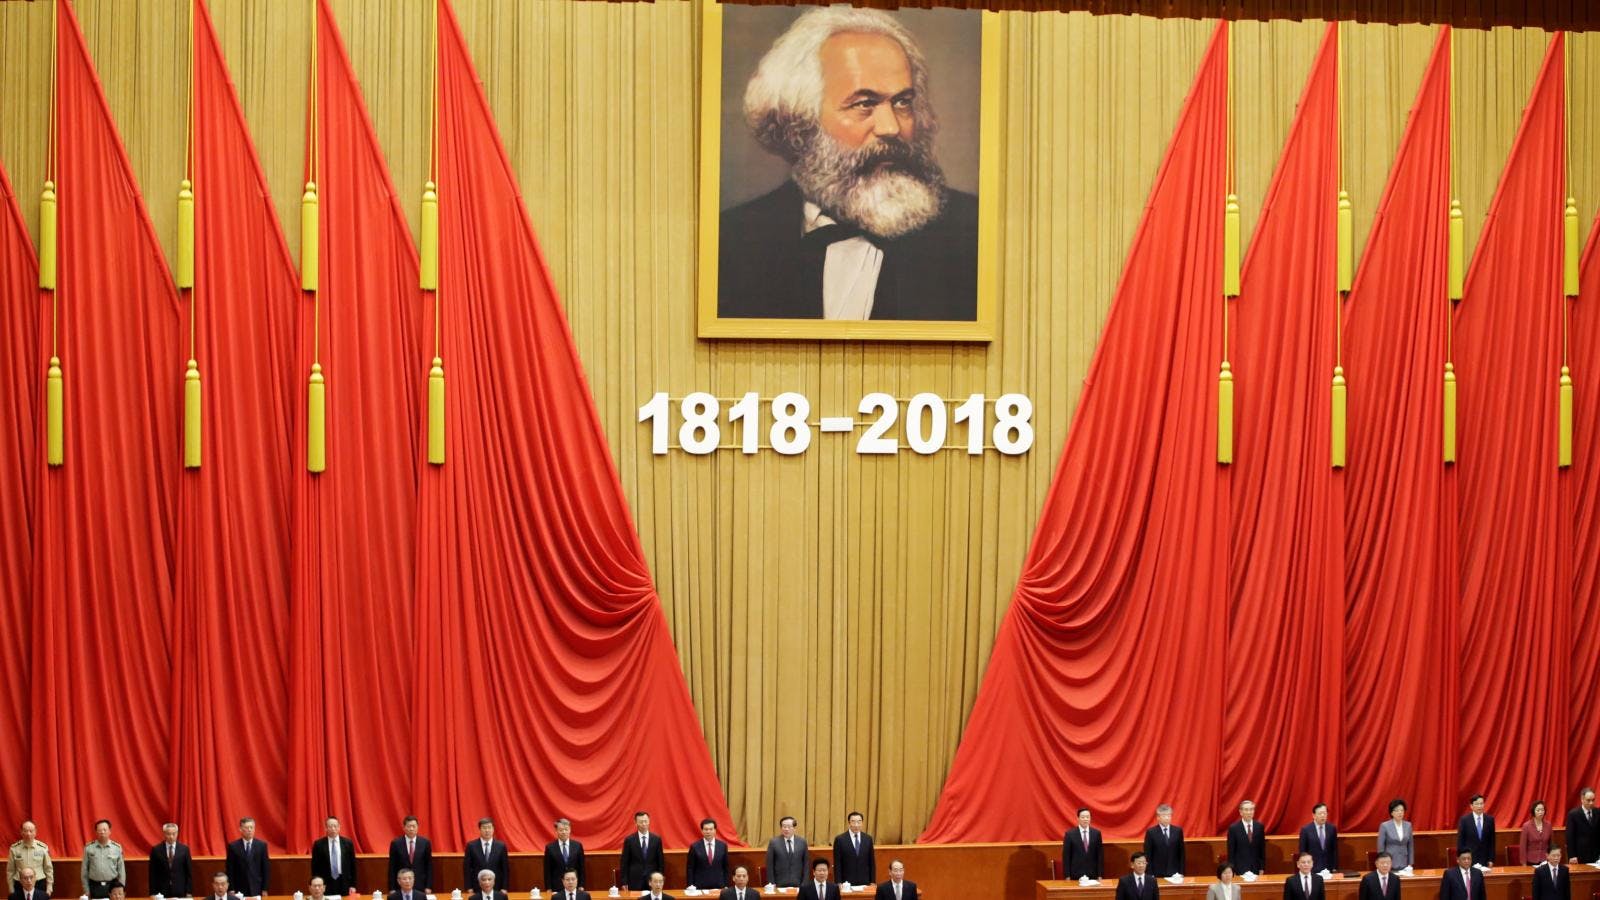 What should socialists say about China?